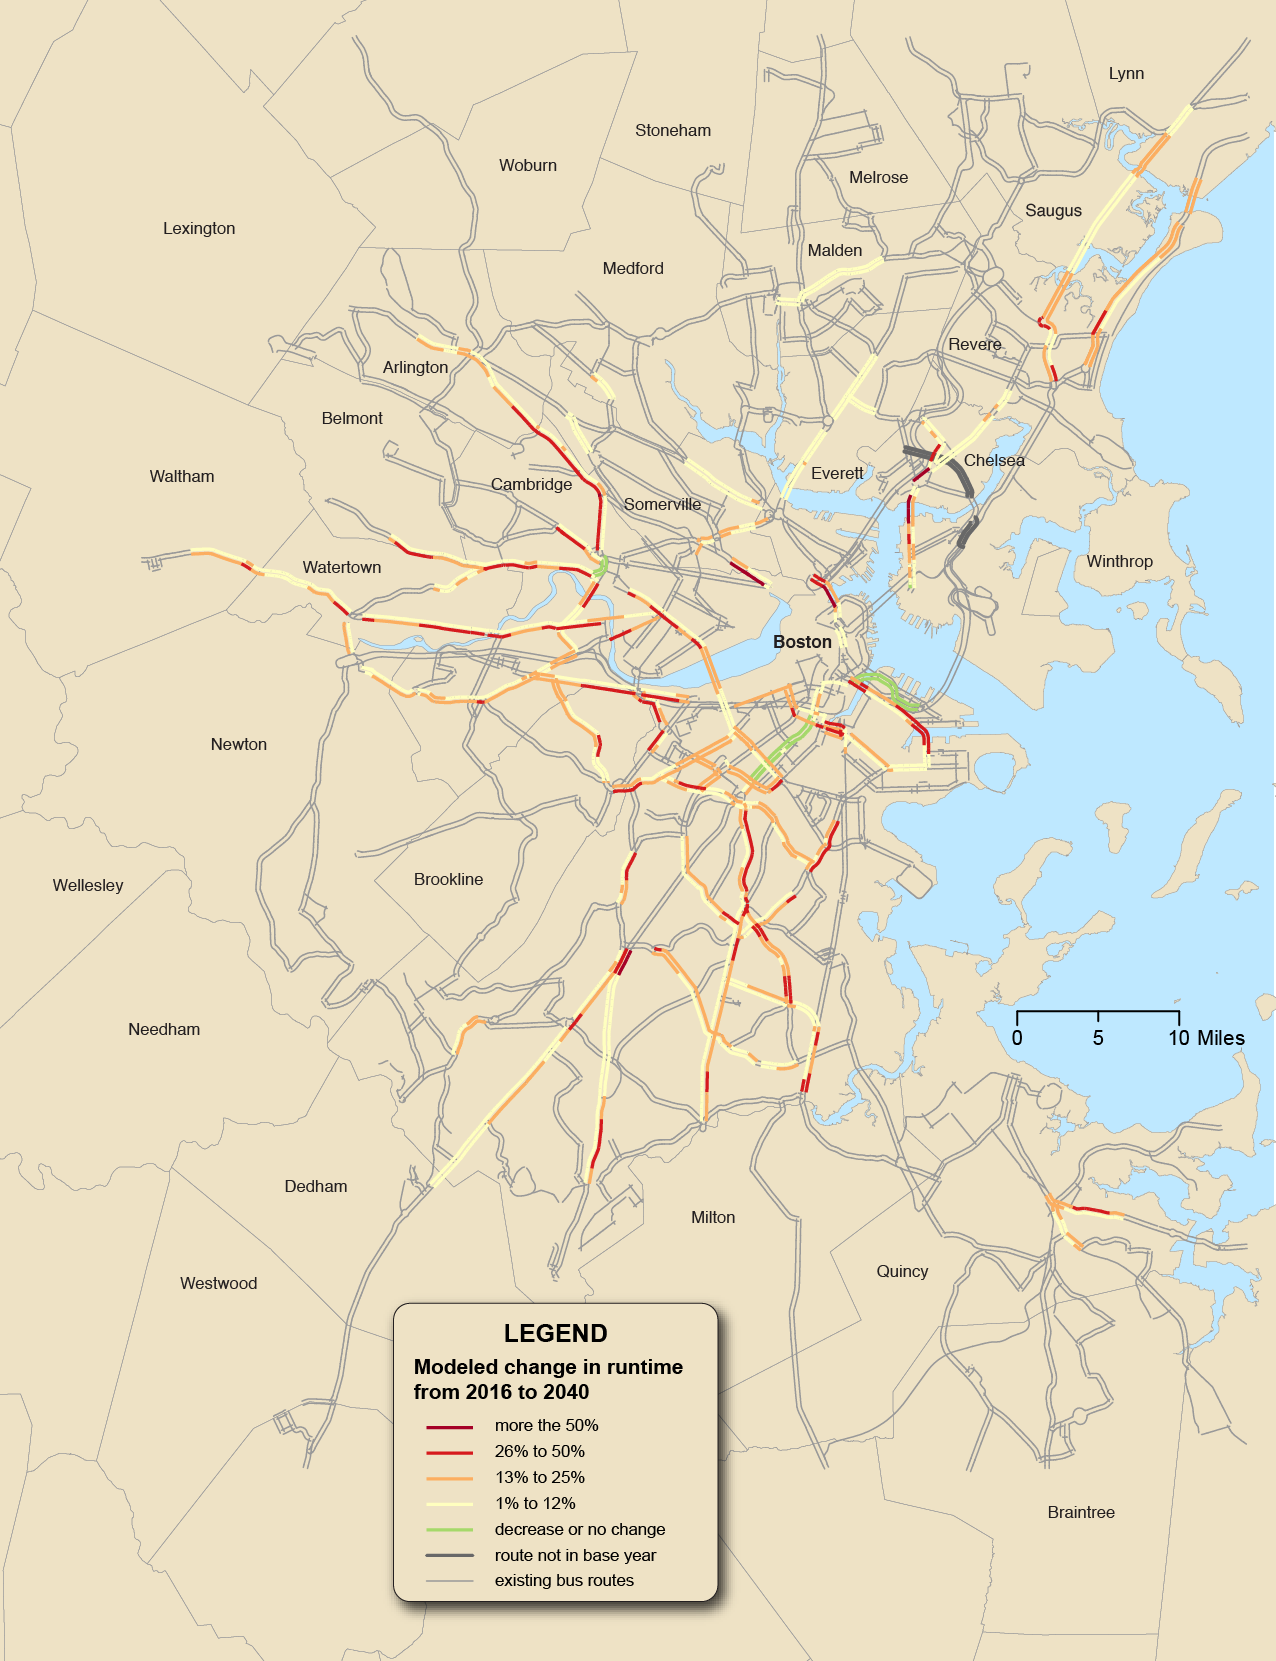 Figure 6-17 is a map of the Boston Region and Priority Bus Corridors with Modeled Change in Bus Run Times from 2016-2040 shown in different shades along the corridor. Figure 6-17 also shows existing bus routes.